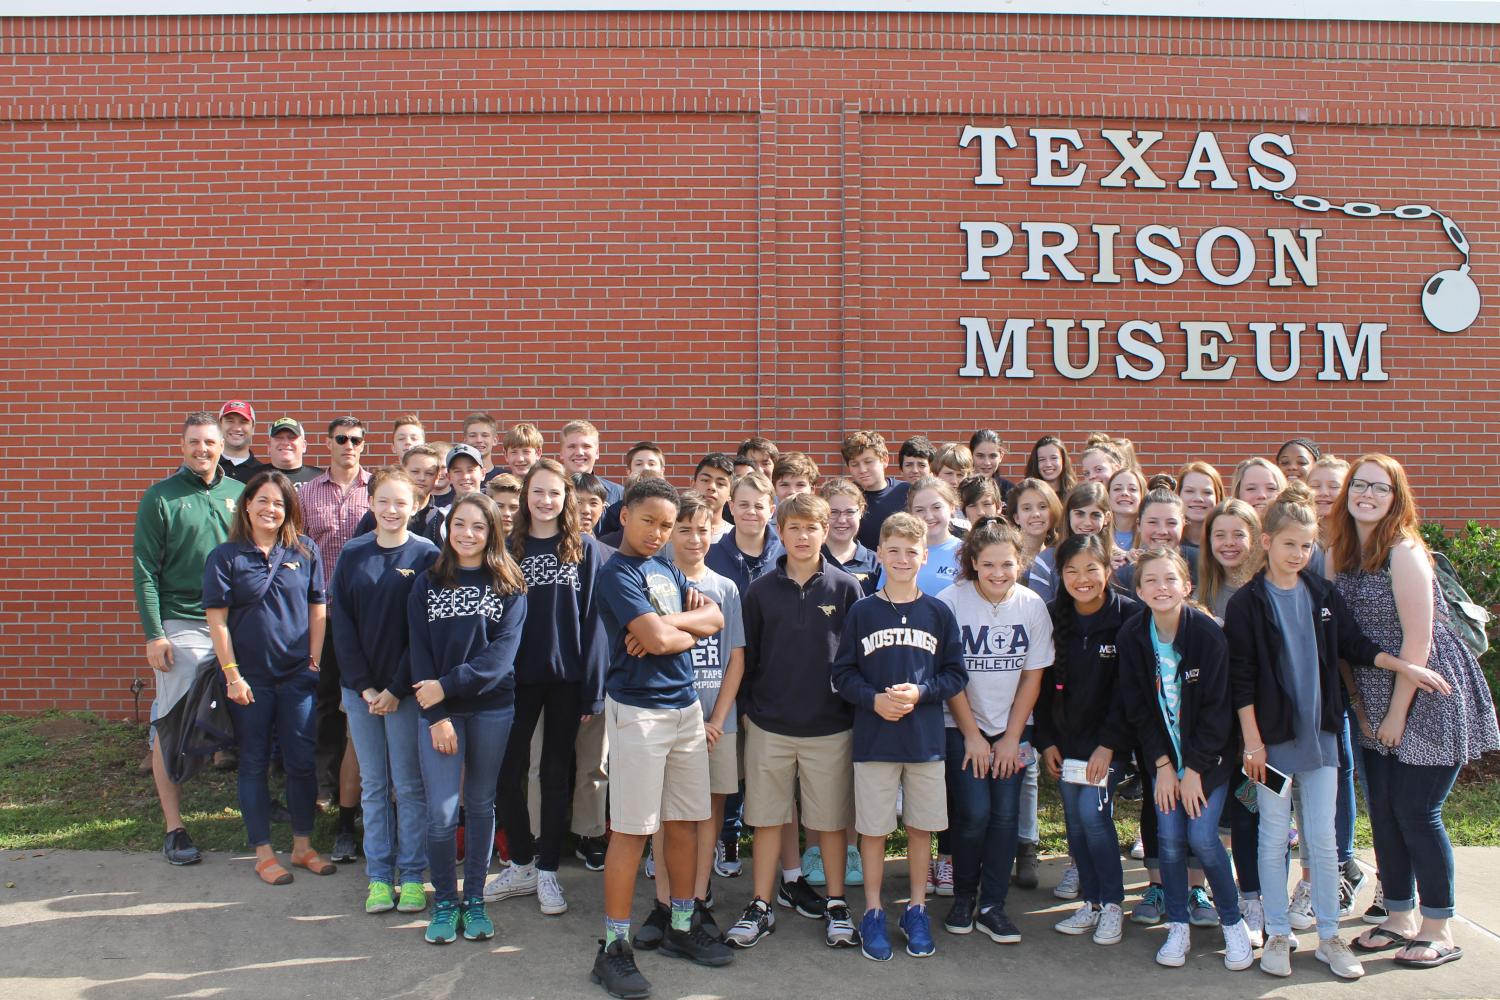 The seventh graders and mca chaperons strike a serious pose in front of the Texas Prison Museum.